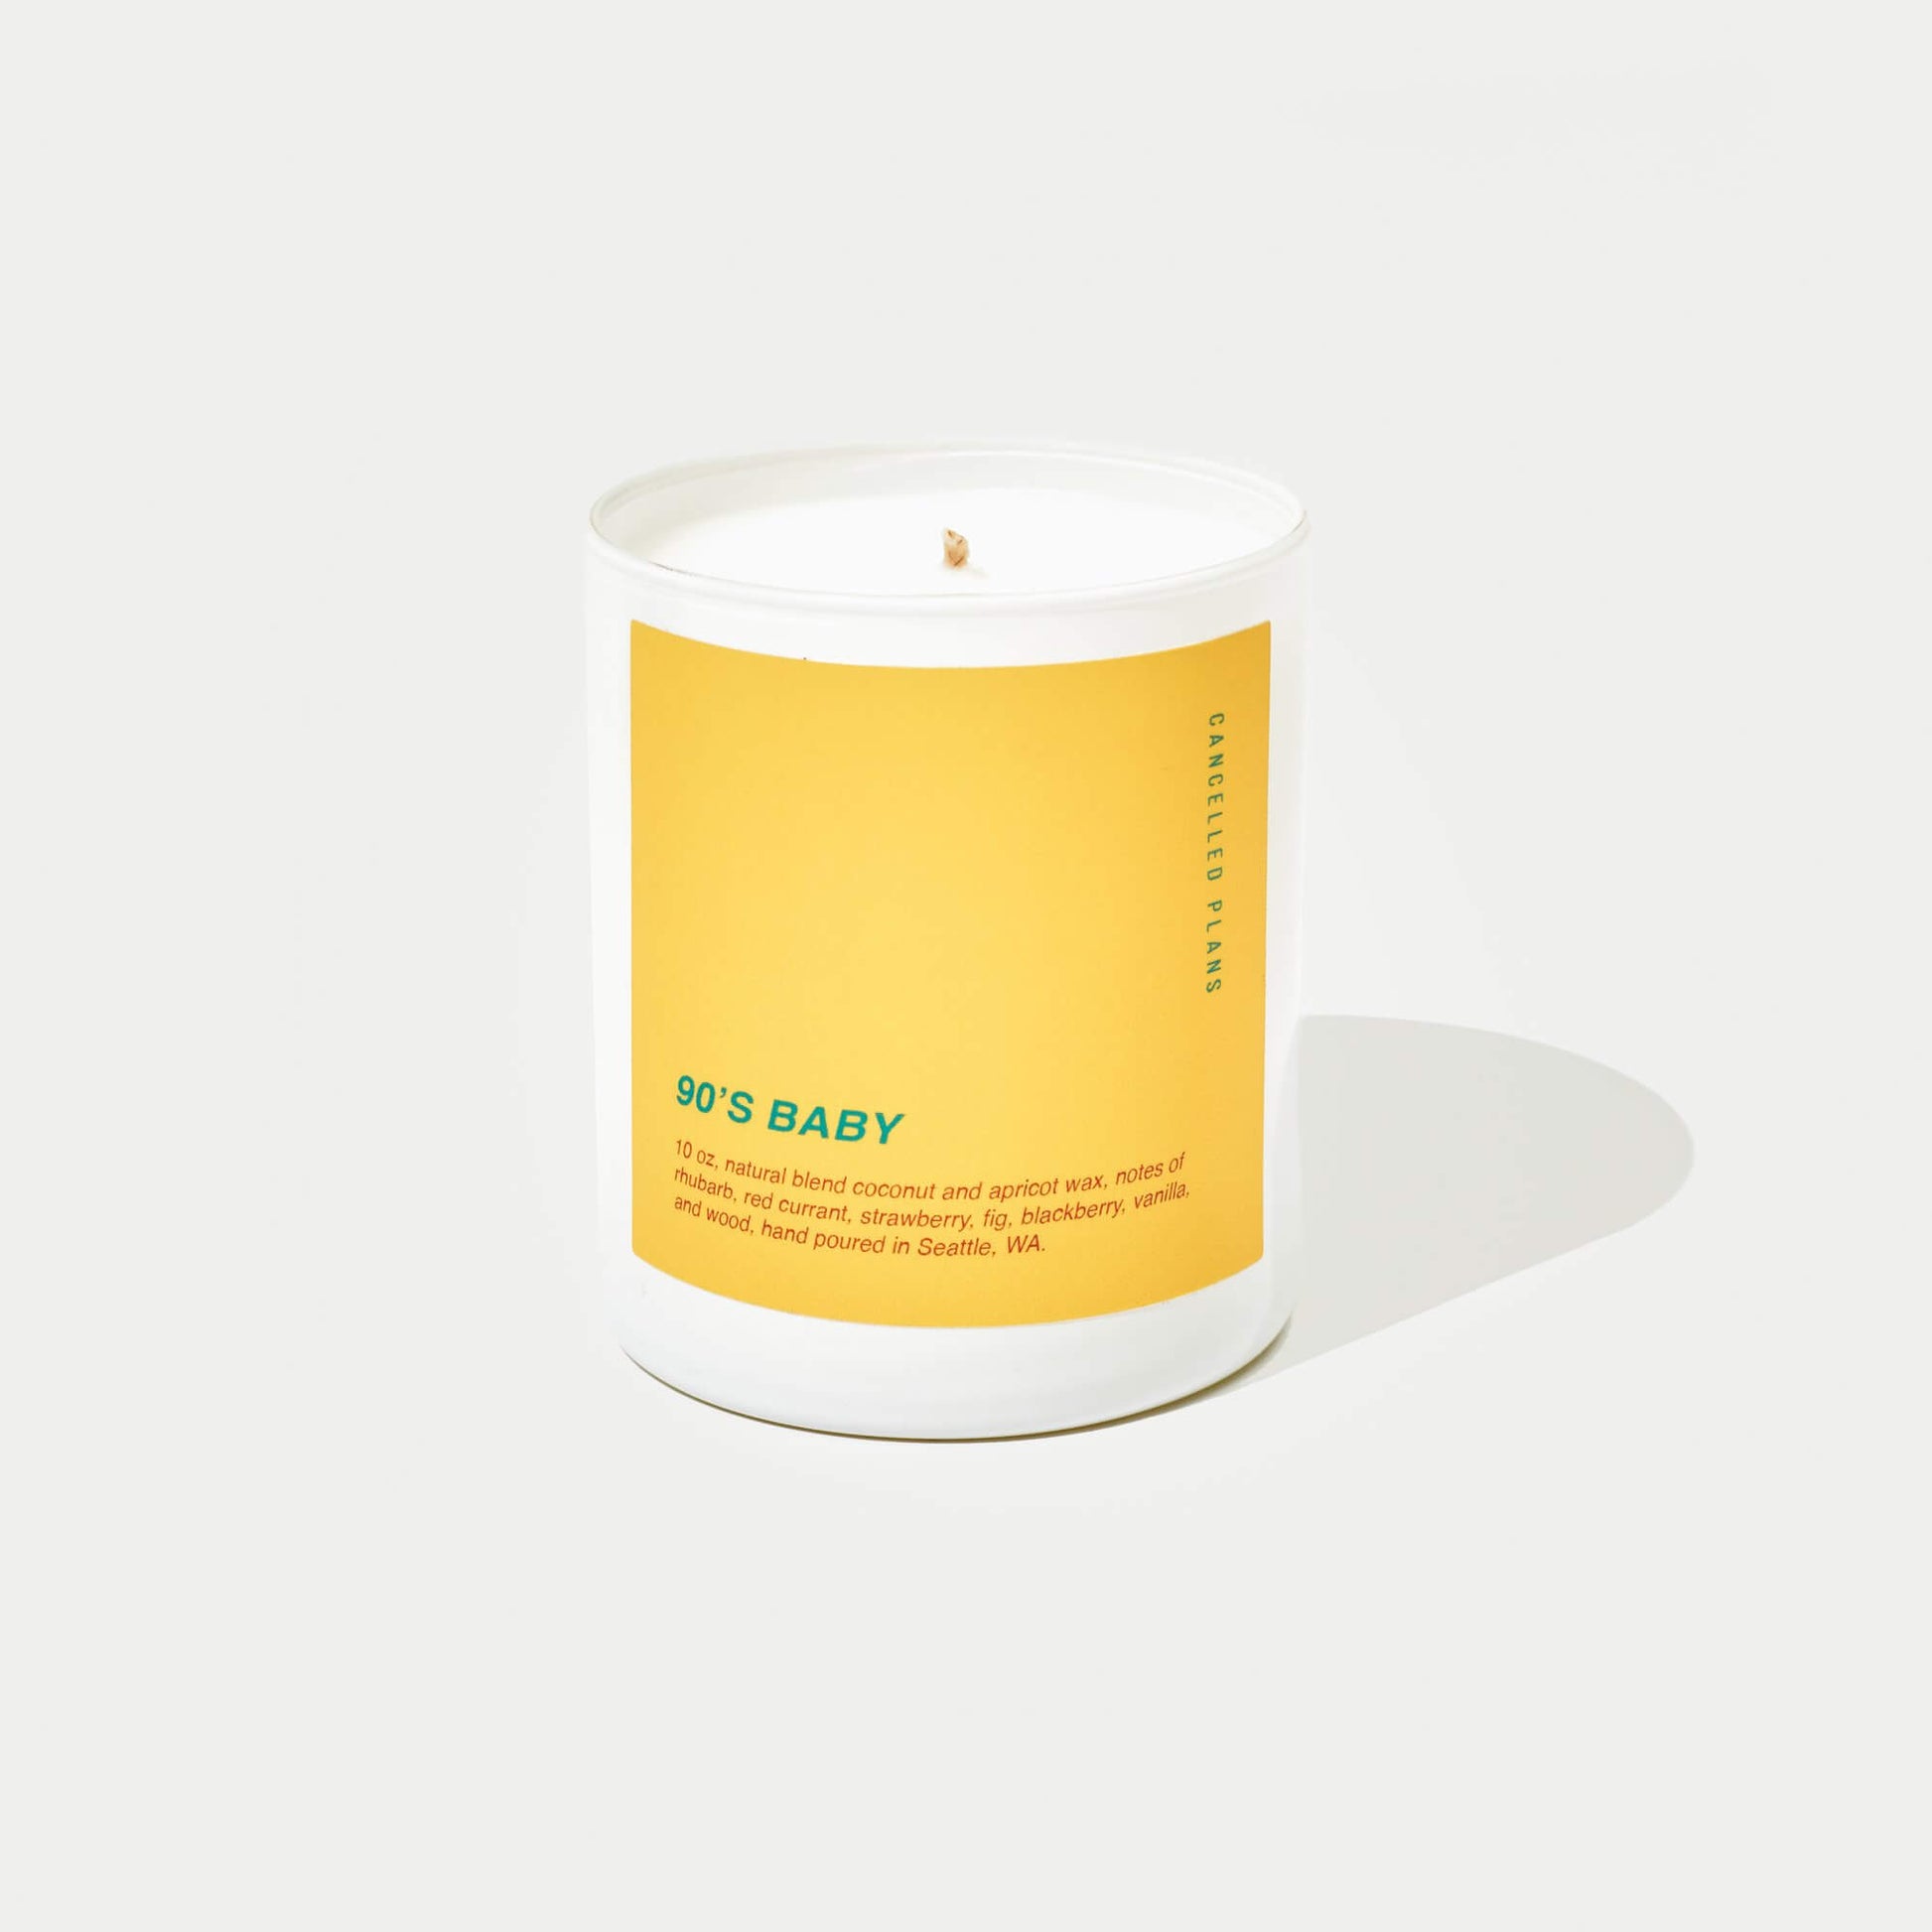 90's Baby Scented Candle by Cancelled Plans